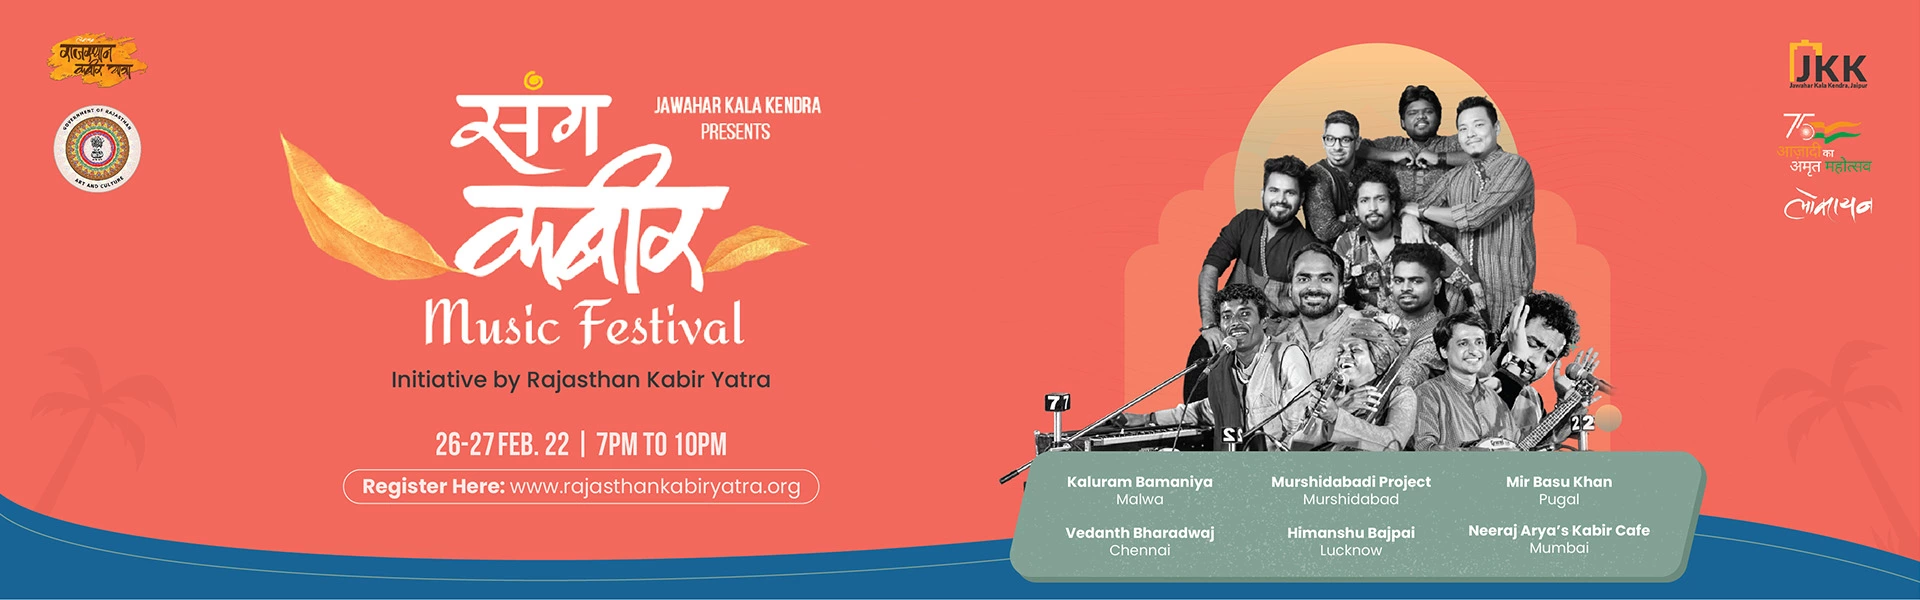 This is the poster for the Rajasthan Kabir Yatra music festival.